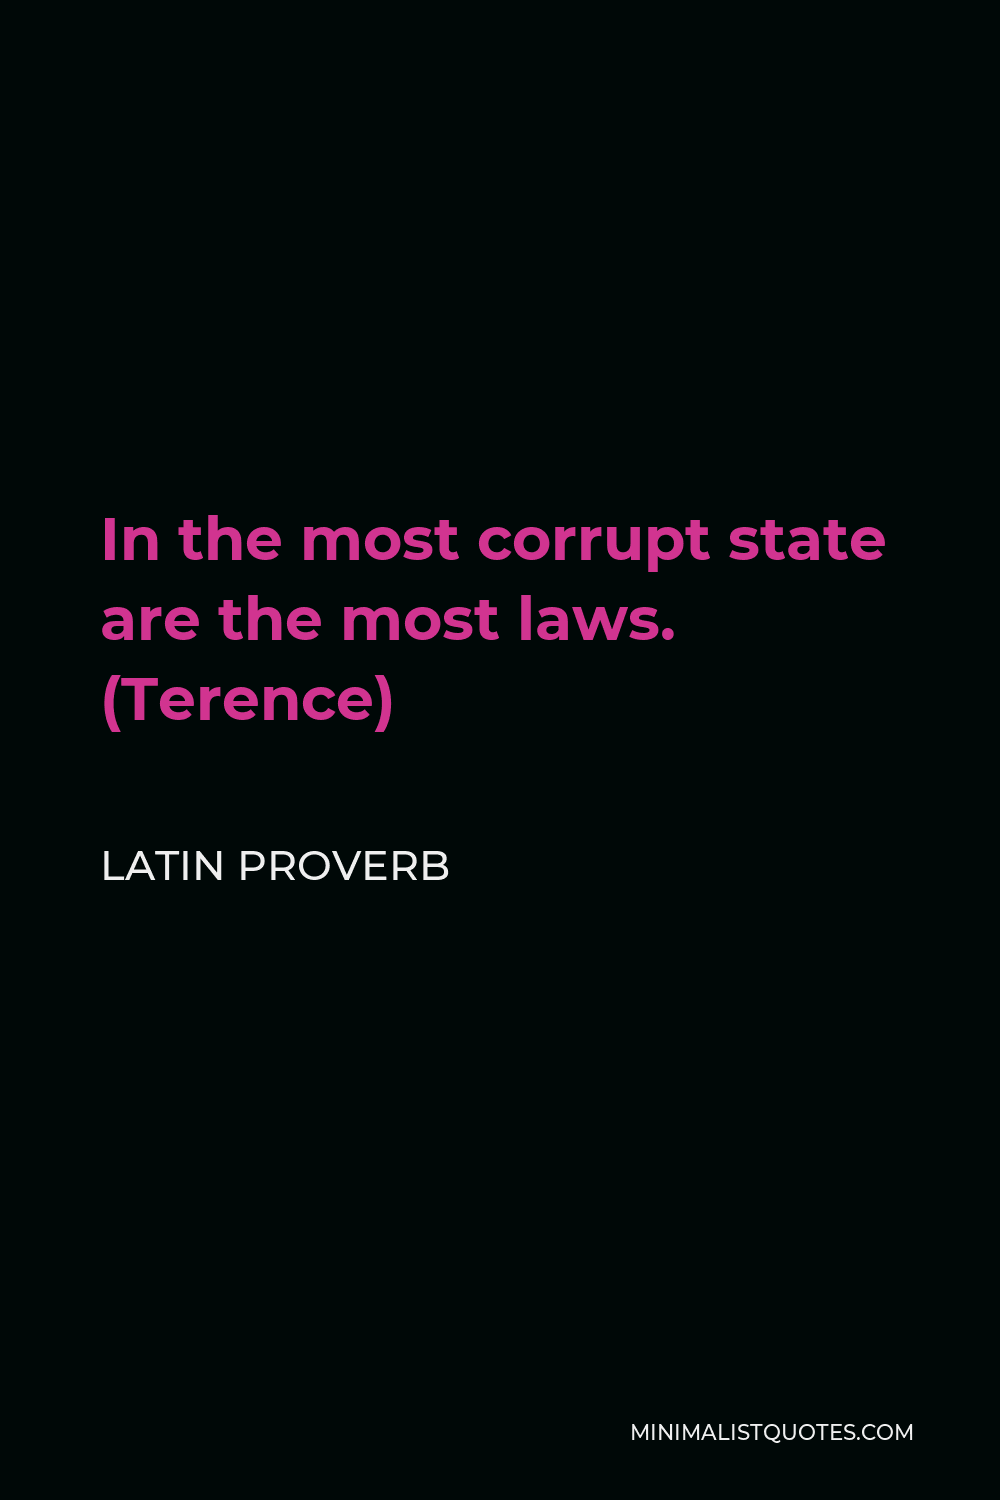 Latin Proverb Quote - In the most corrupt state are the most laws. (Terence)